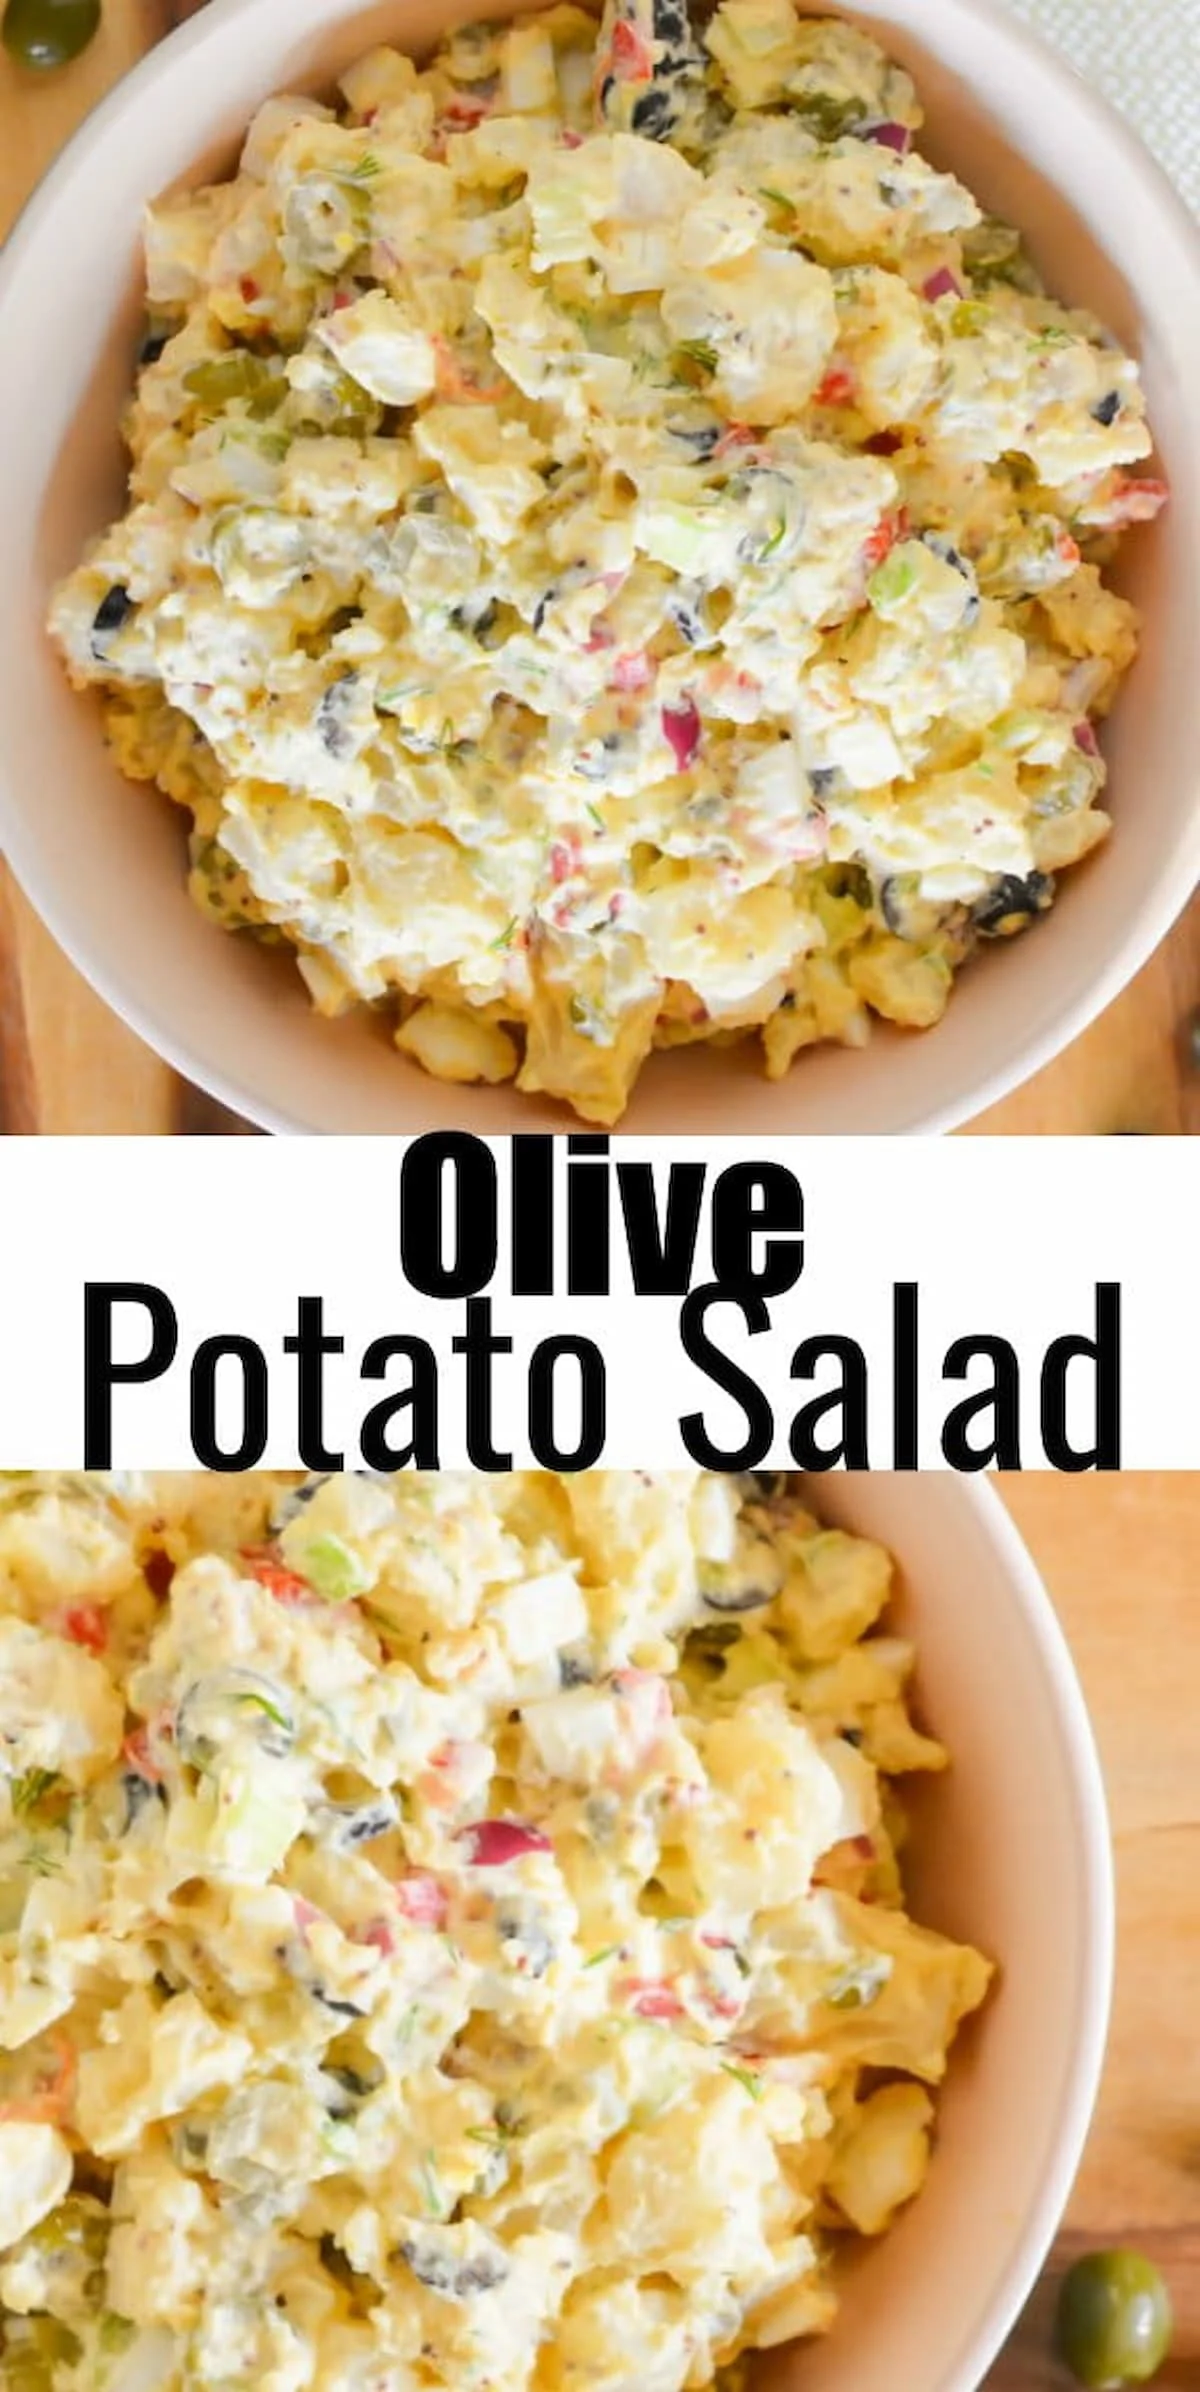 Olive Potato Salad is a delicious variation of traditional Potato Salad for Picnic and Barbecue Side Dish Recipe. Sweet and tangy with ripe green and black olives with spicy garlic dill pickles from Serena Bakes Simply From Scratch.